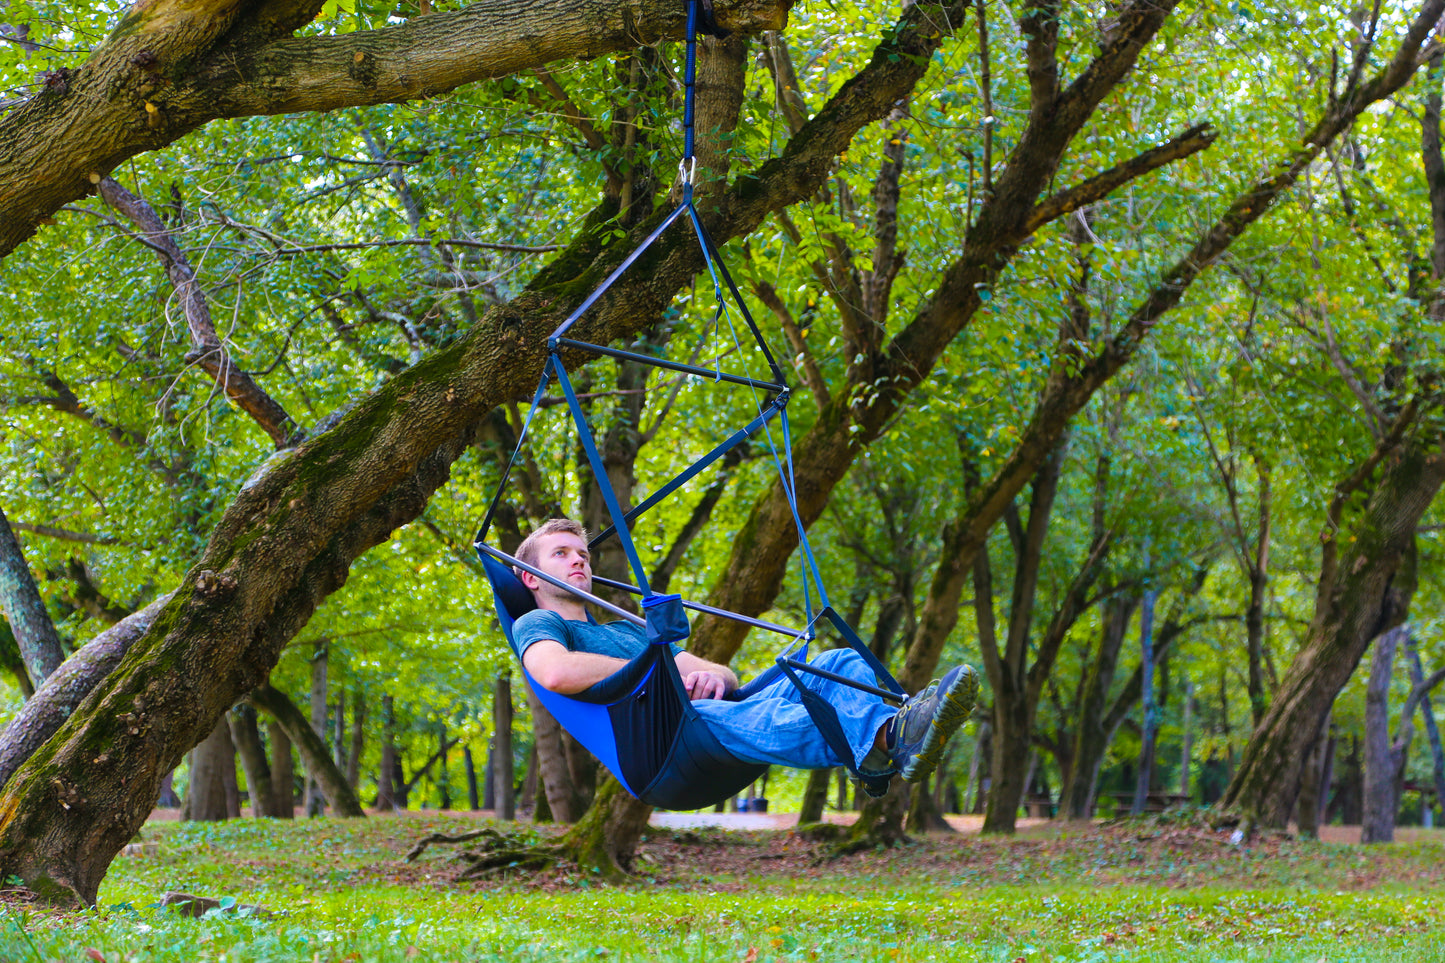 Lounger™ Hanging Chair